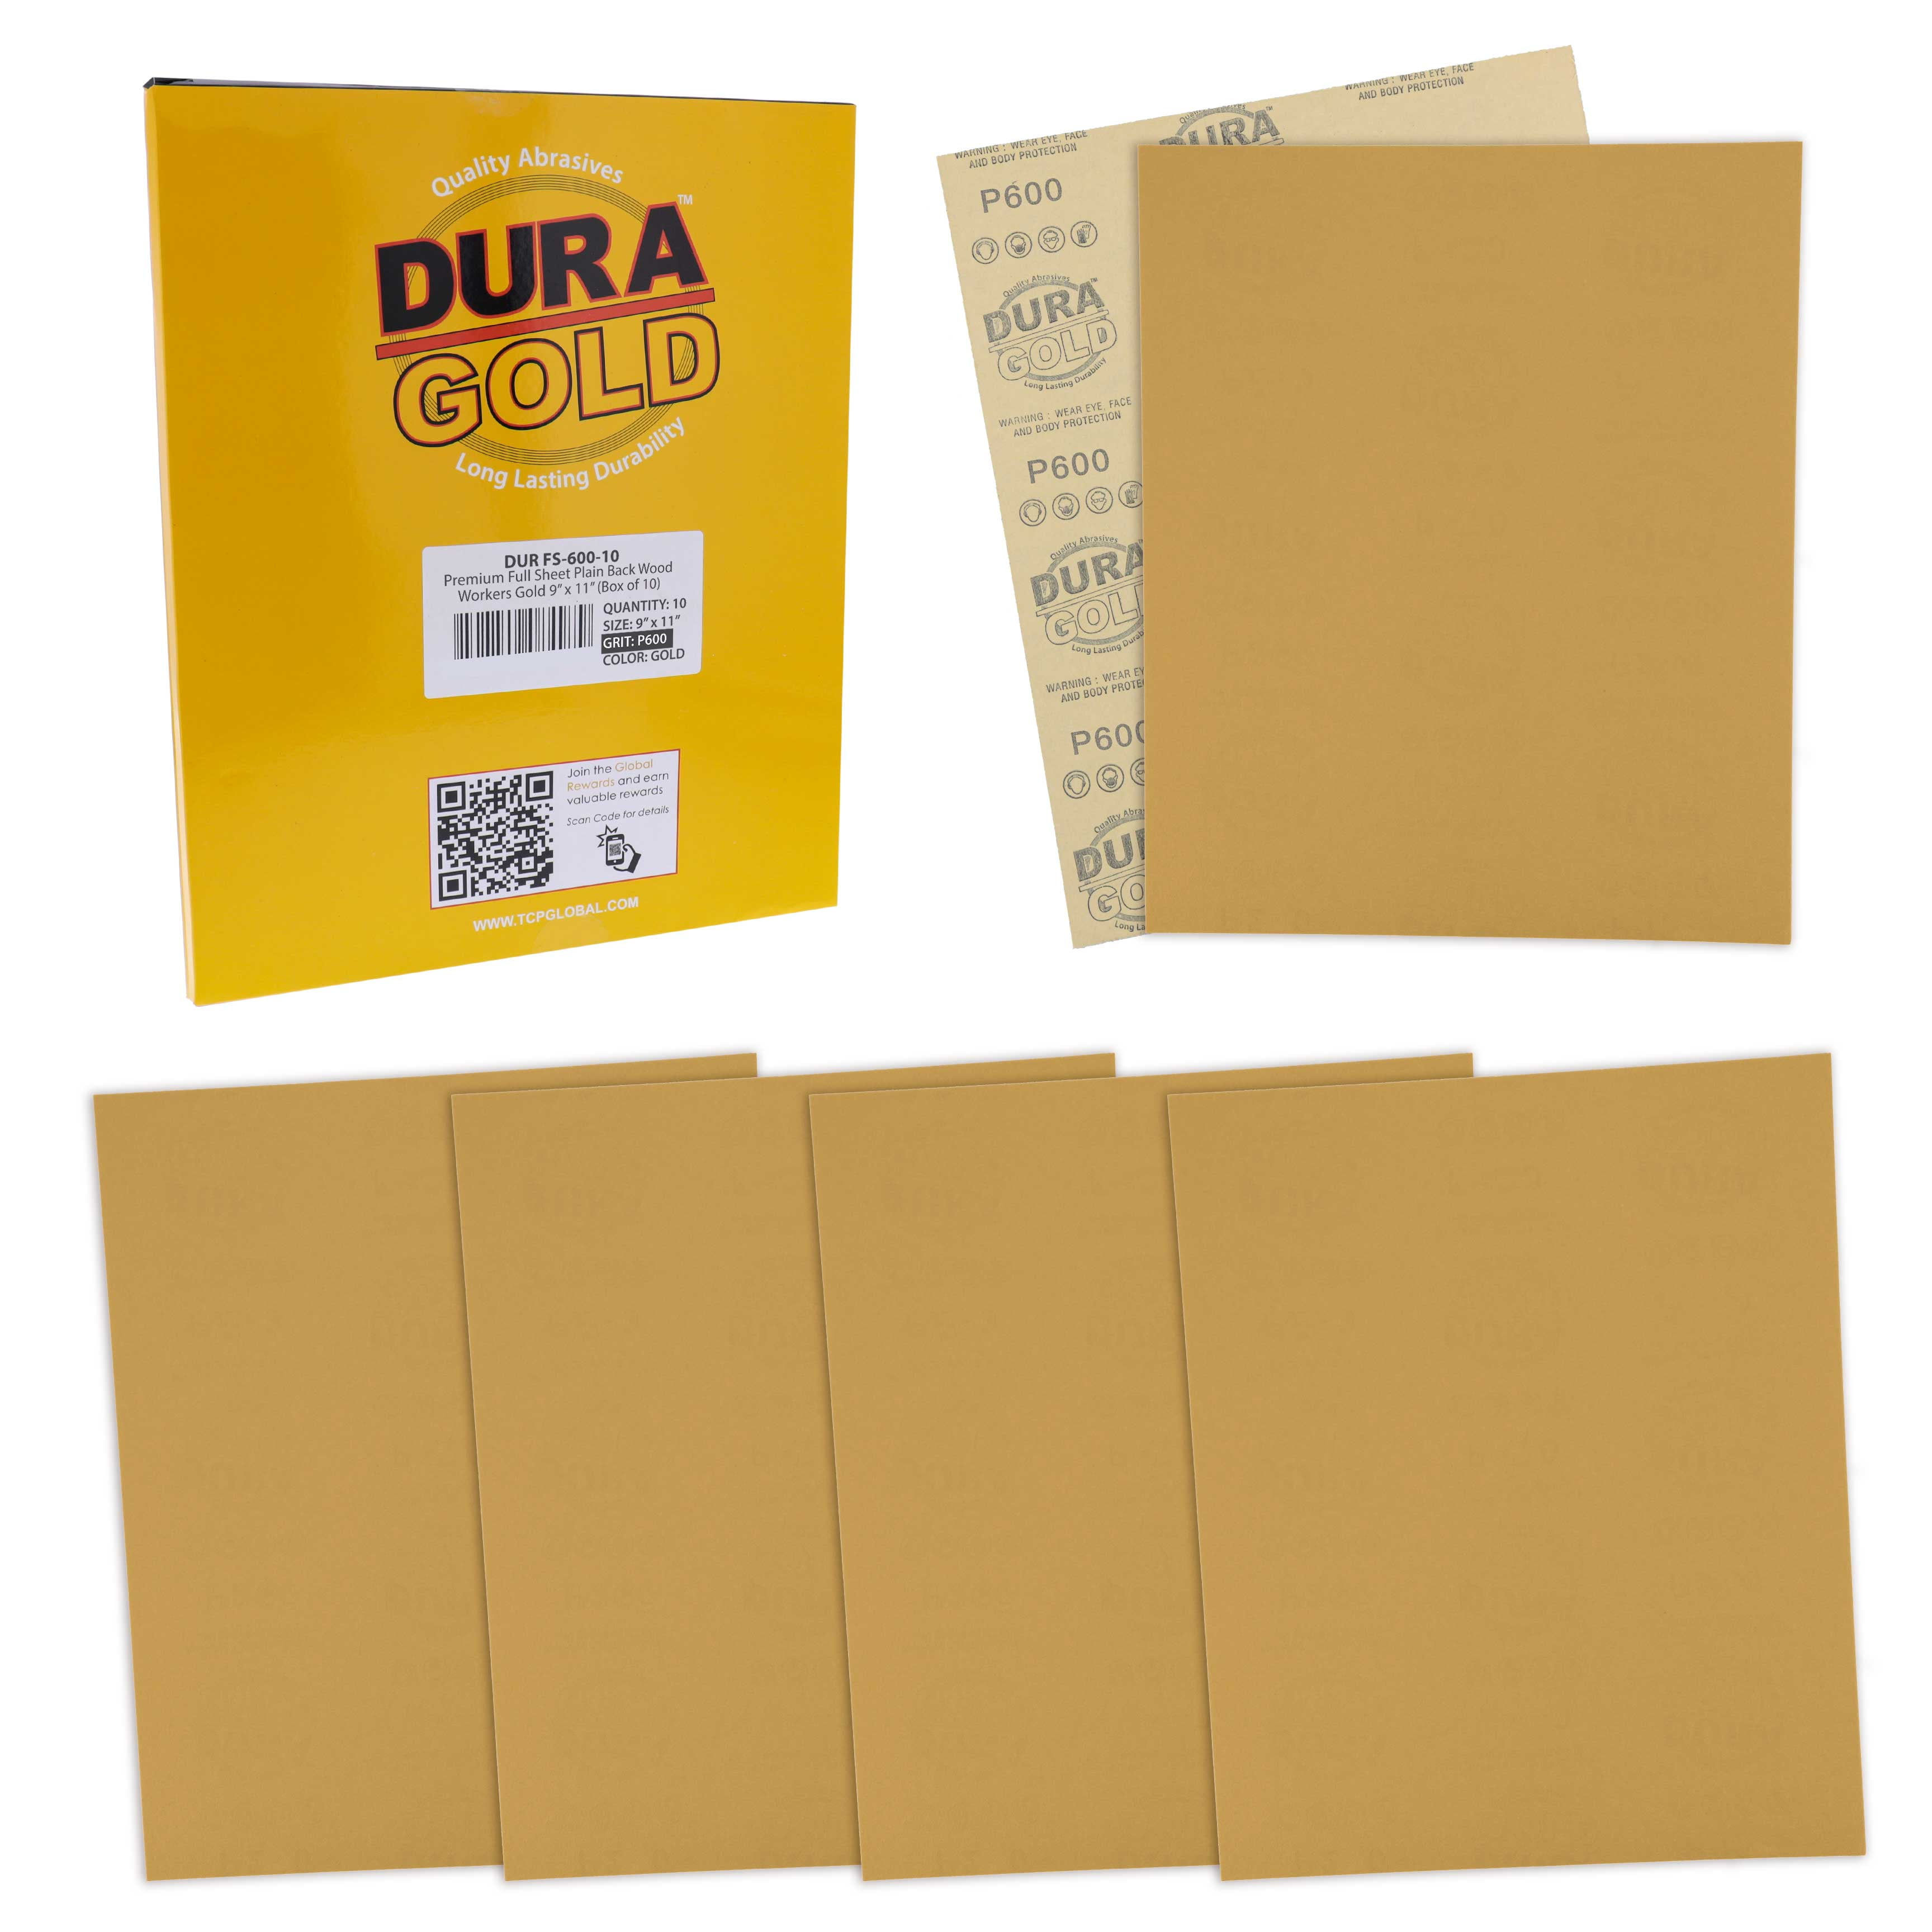 Dura-gold - Pure Gold Woodworker and Painters Grade - Gold Superior Tack Cloths - (Box of 12)